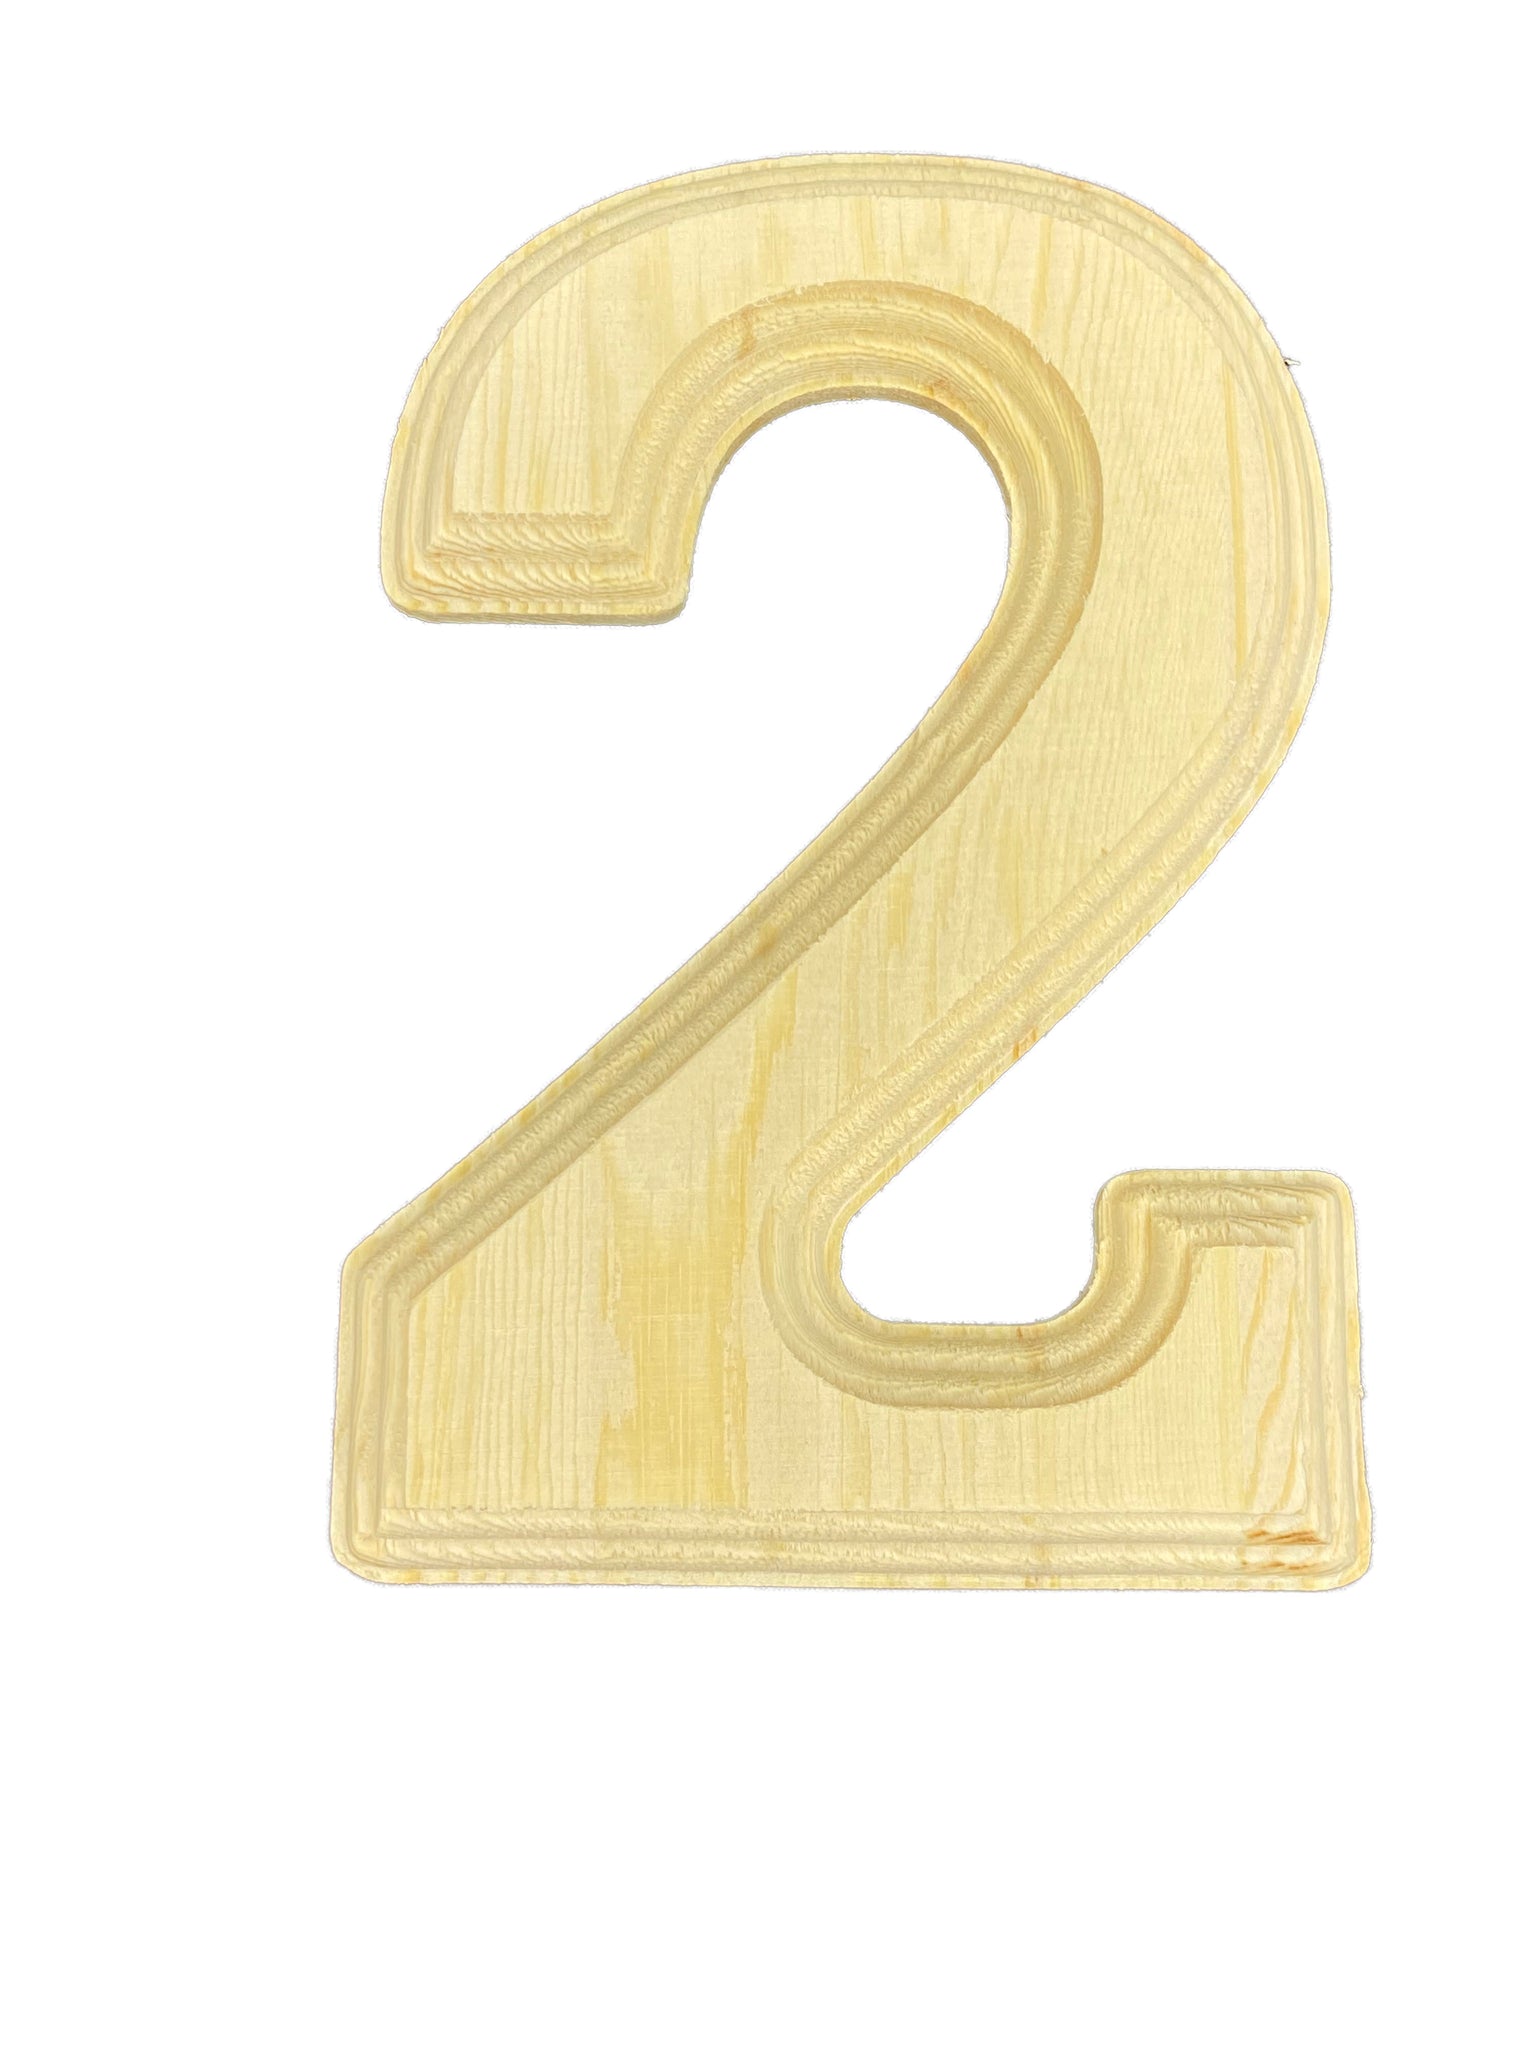 Crafts Central Pine Wood Beveled Wooden Numbers for Arts & Crafts, Decorations and DIY (Number 3)